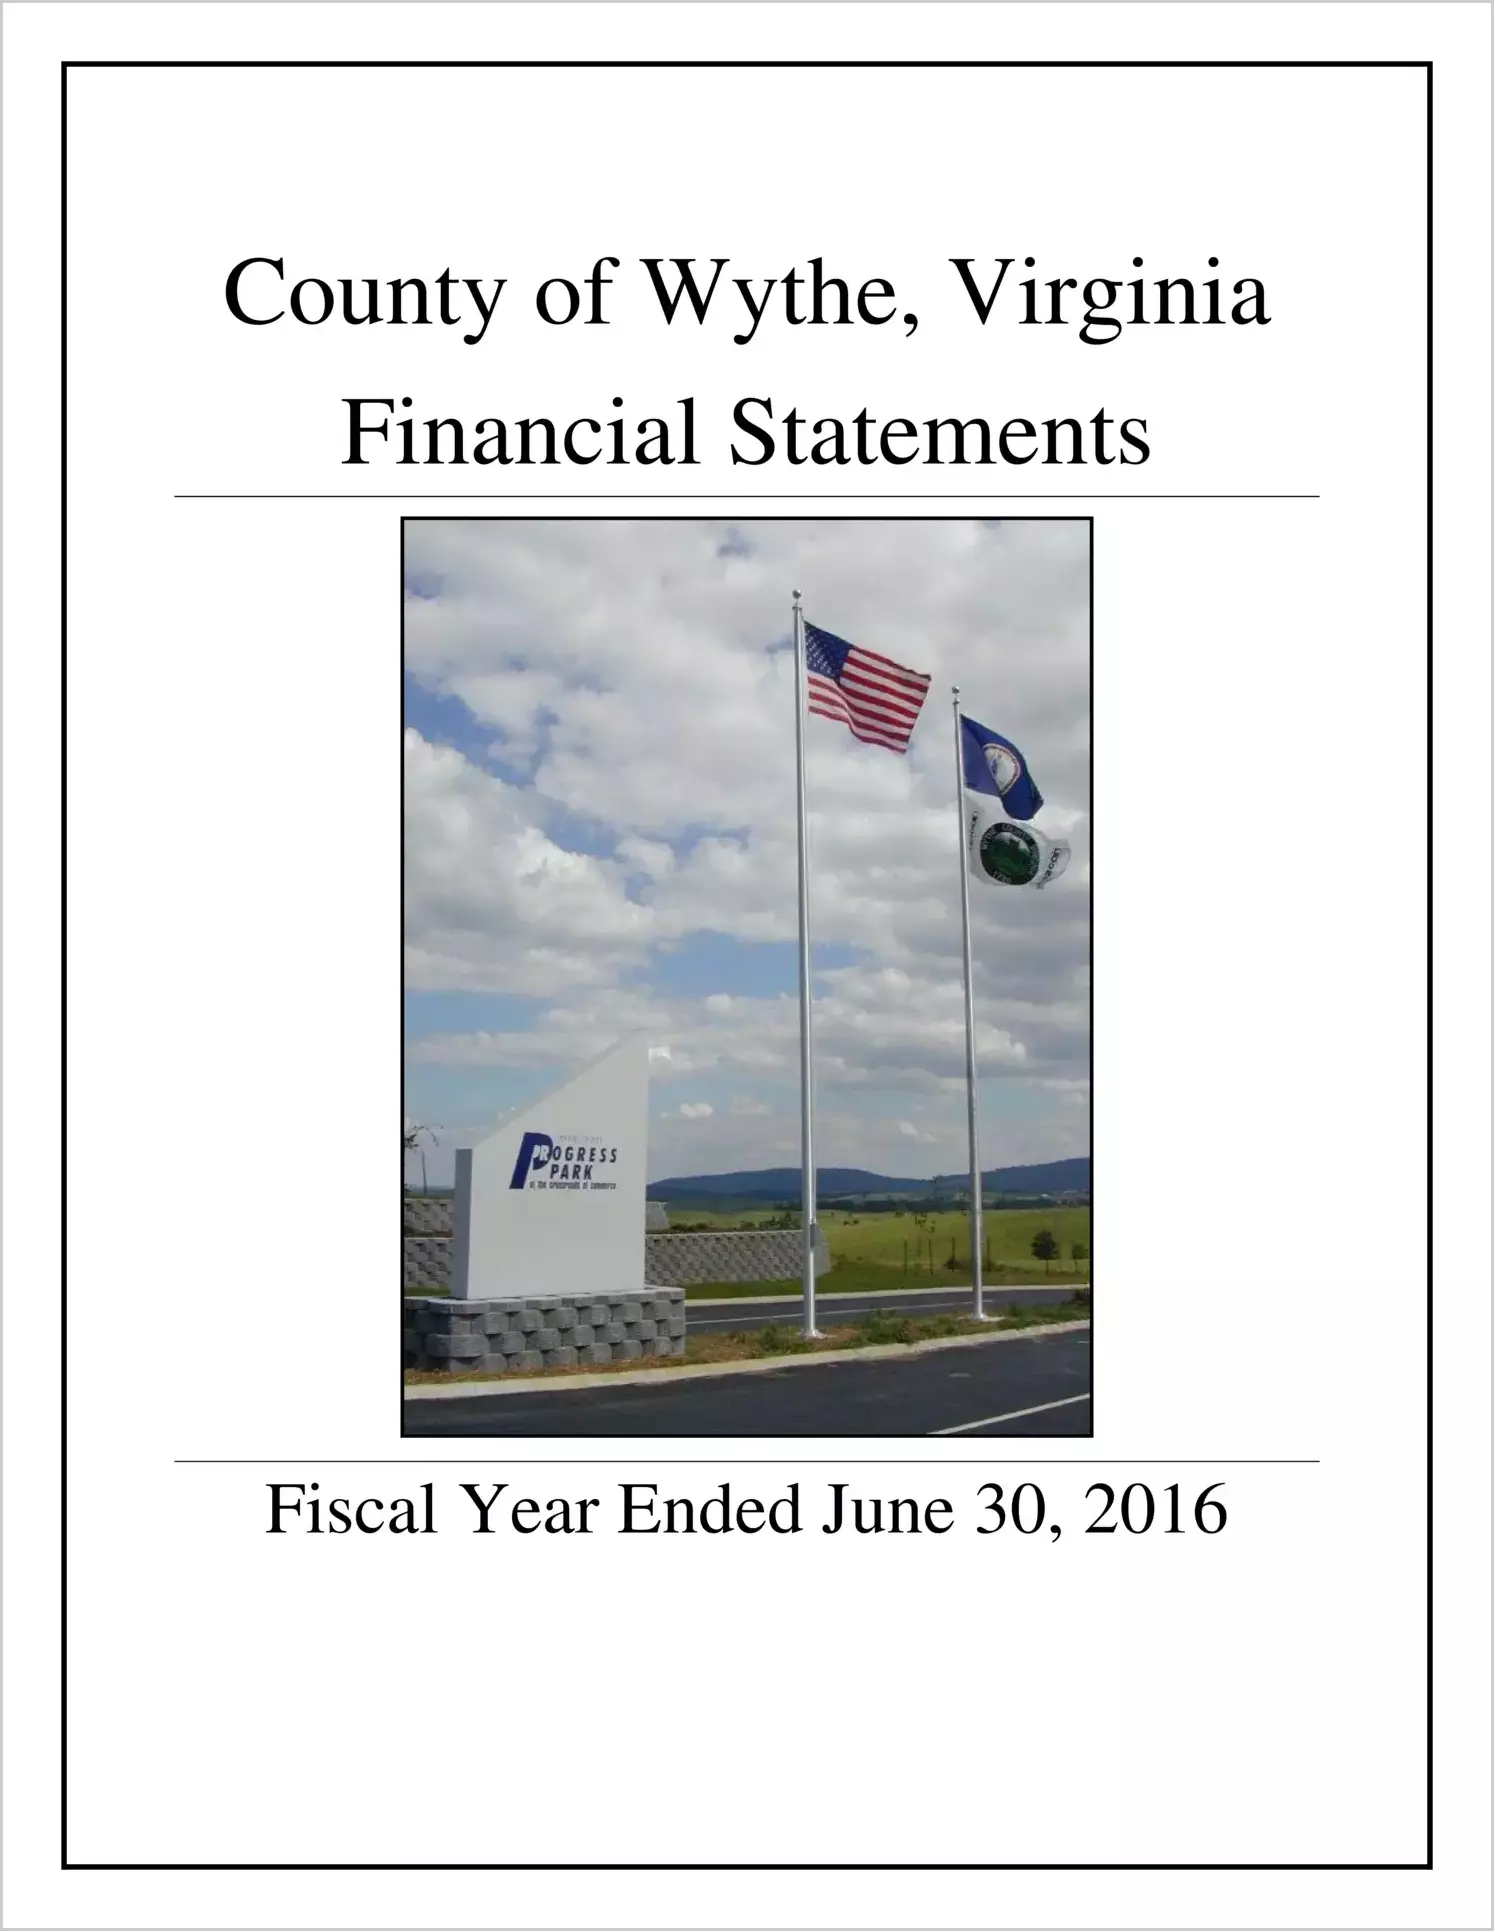 2016 Annual Financial Report for County of Wythe